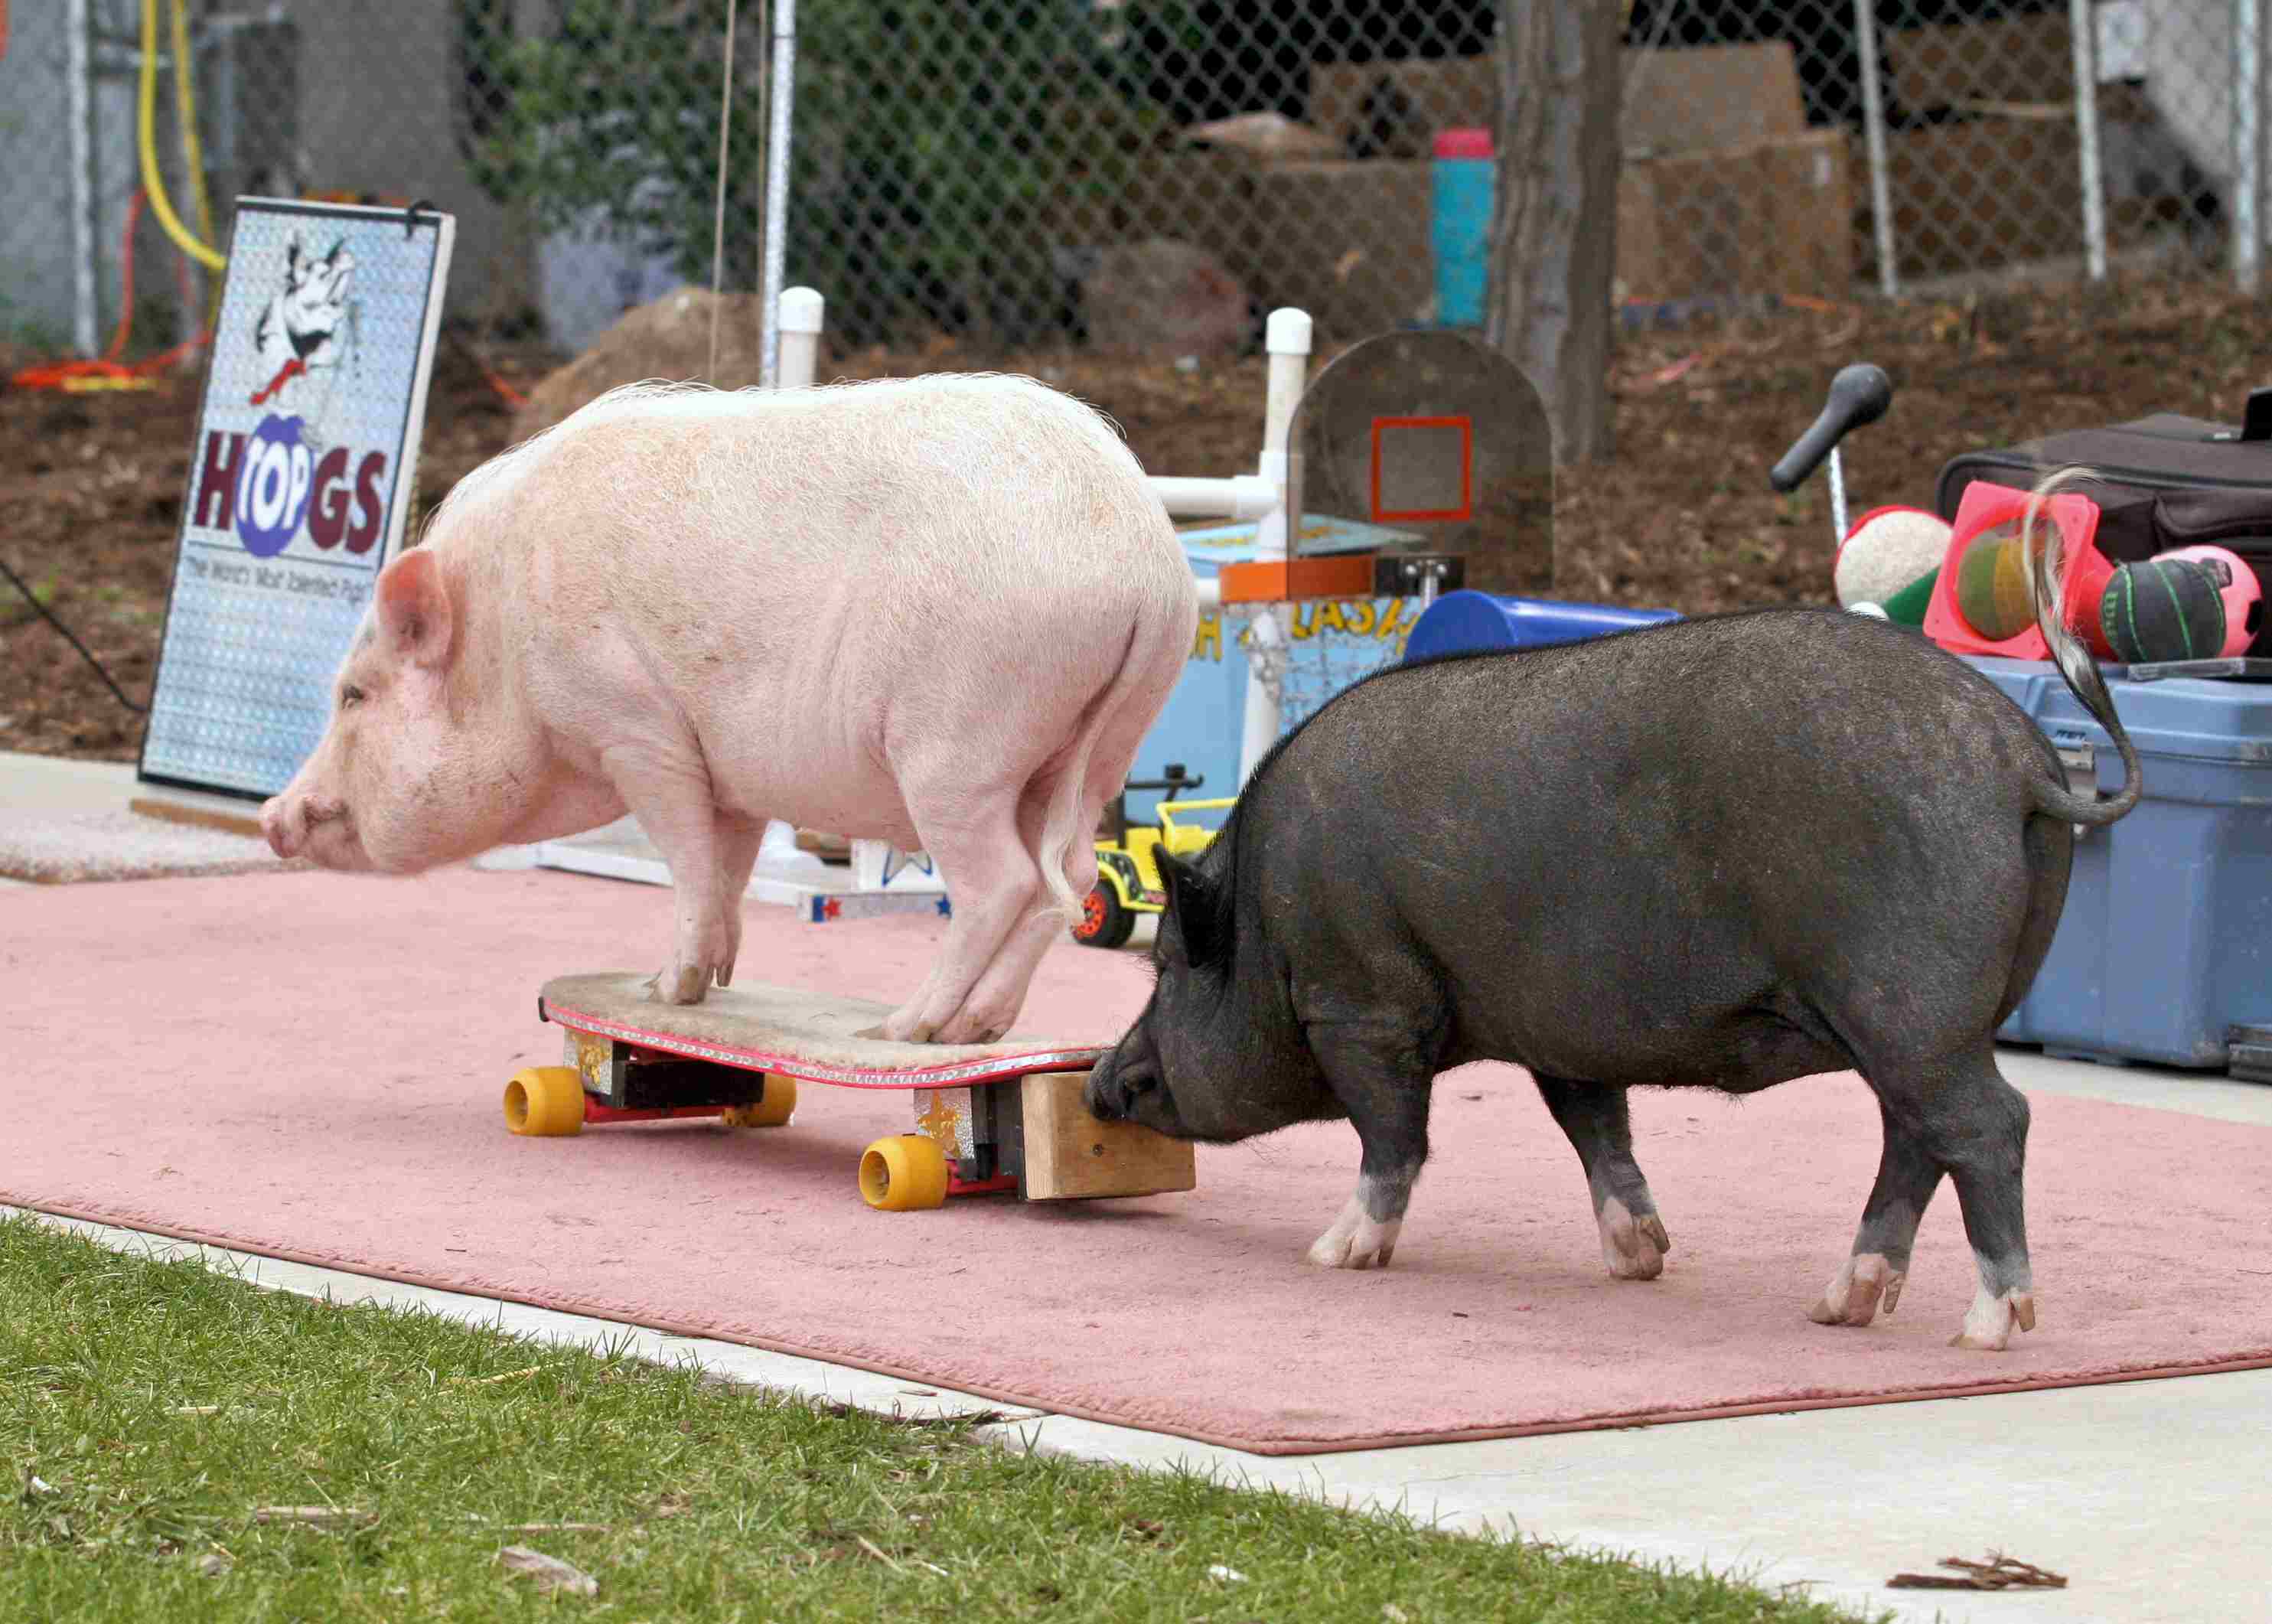 Hog on a skateboard being pushed by another hog